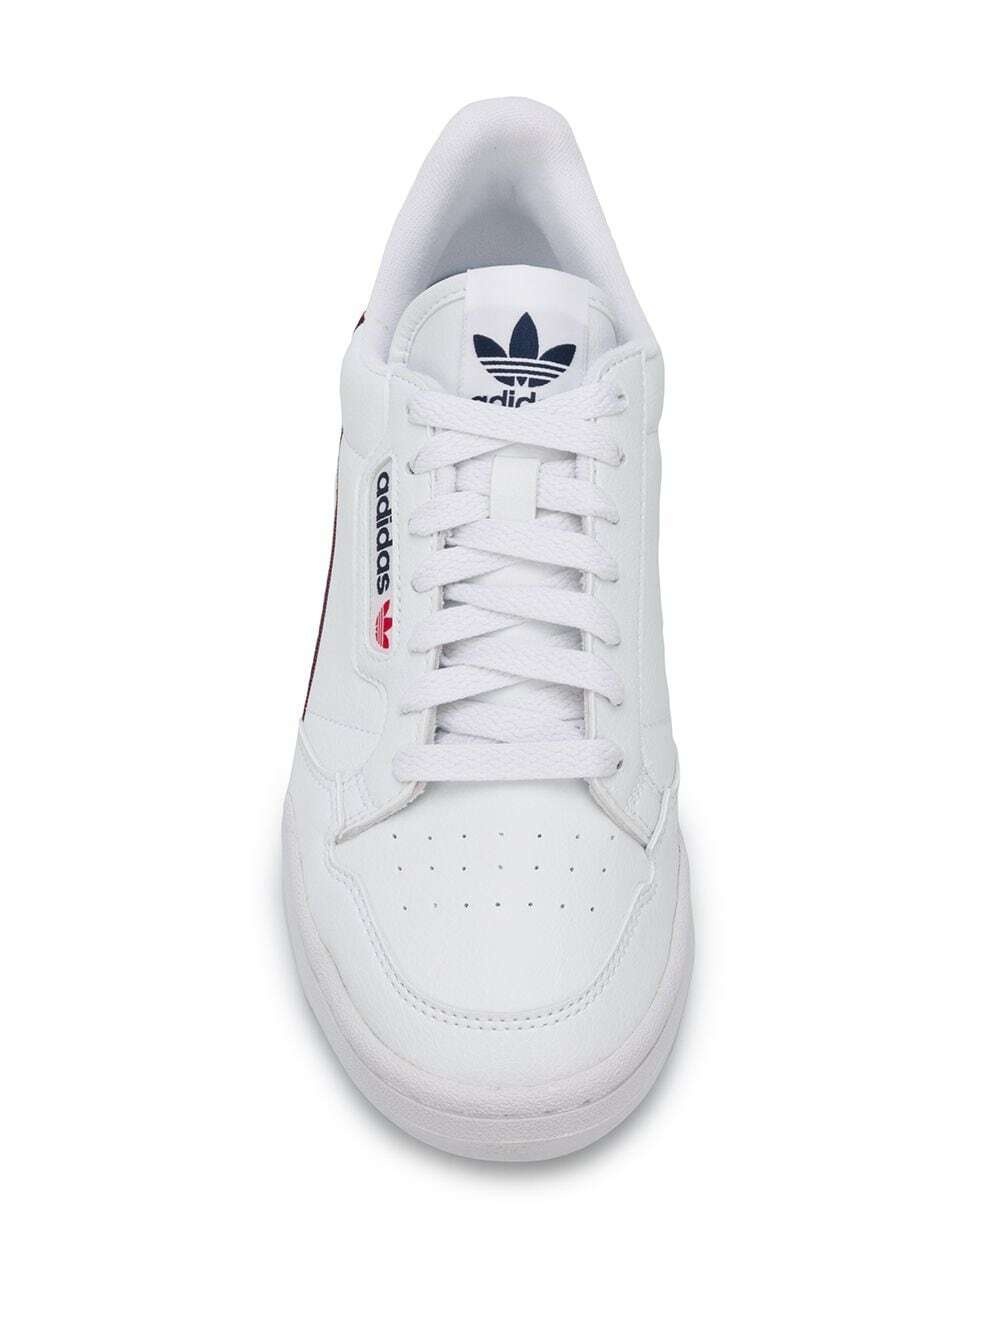 ADIDAS - Leather Sneakers adidas